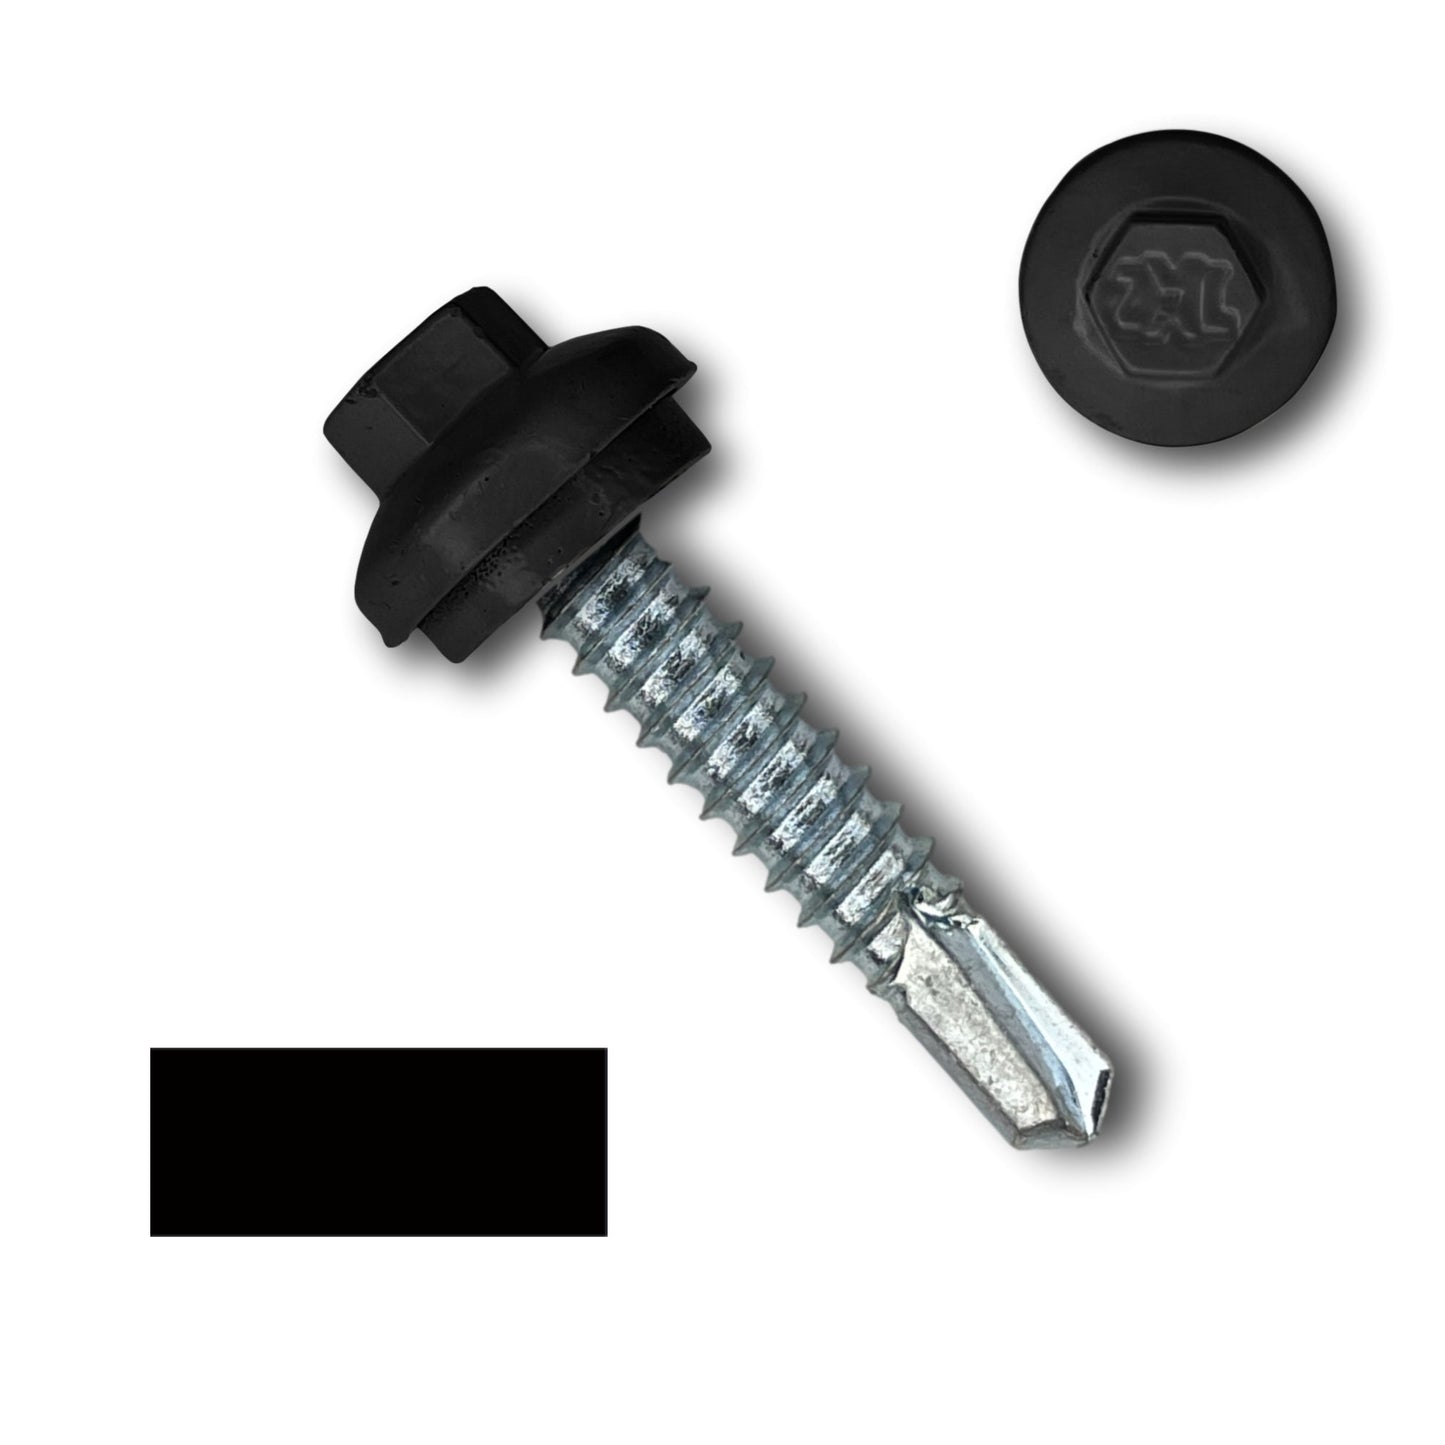 A close-up image of a #14 x 1.25" ZXL Dome Cap Metal Building Screws (Metal-to-Metal), Self-Drilling - 250, 500, or 1000 Pack from Perma Cover with a black hex head and built-in washer. The head features a branded imprint. An additional view of the screw head is displayed separately in the top-right corner. A black rectangular shape is present in the bottom left, suitable for metal building screws.